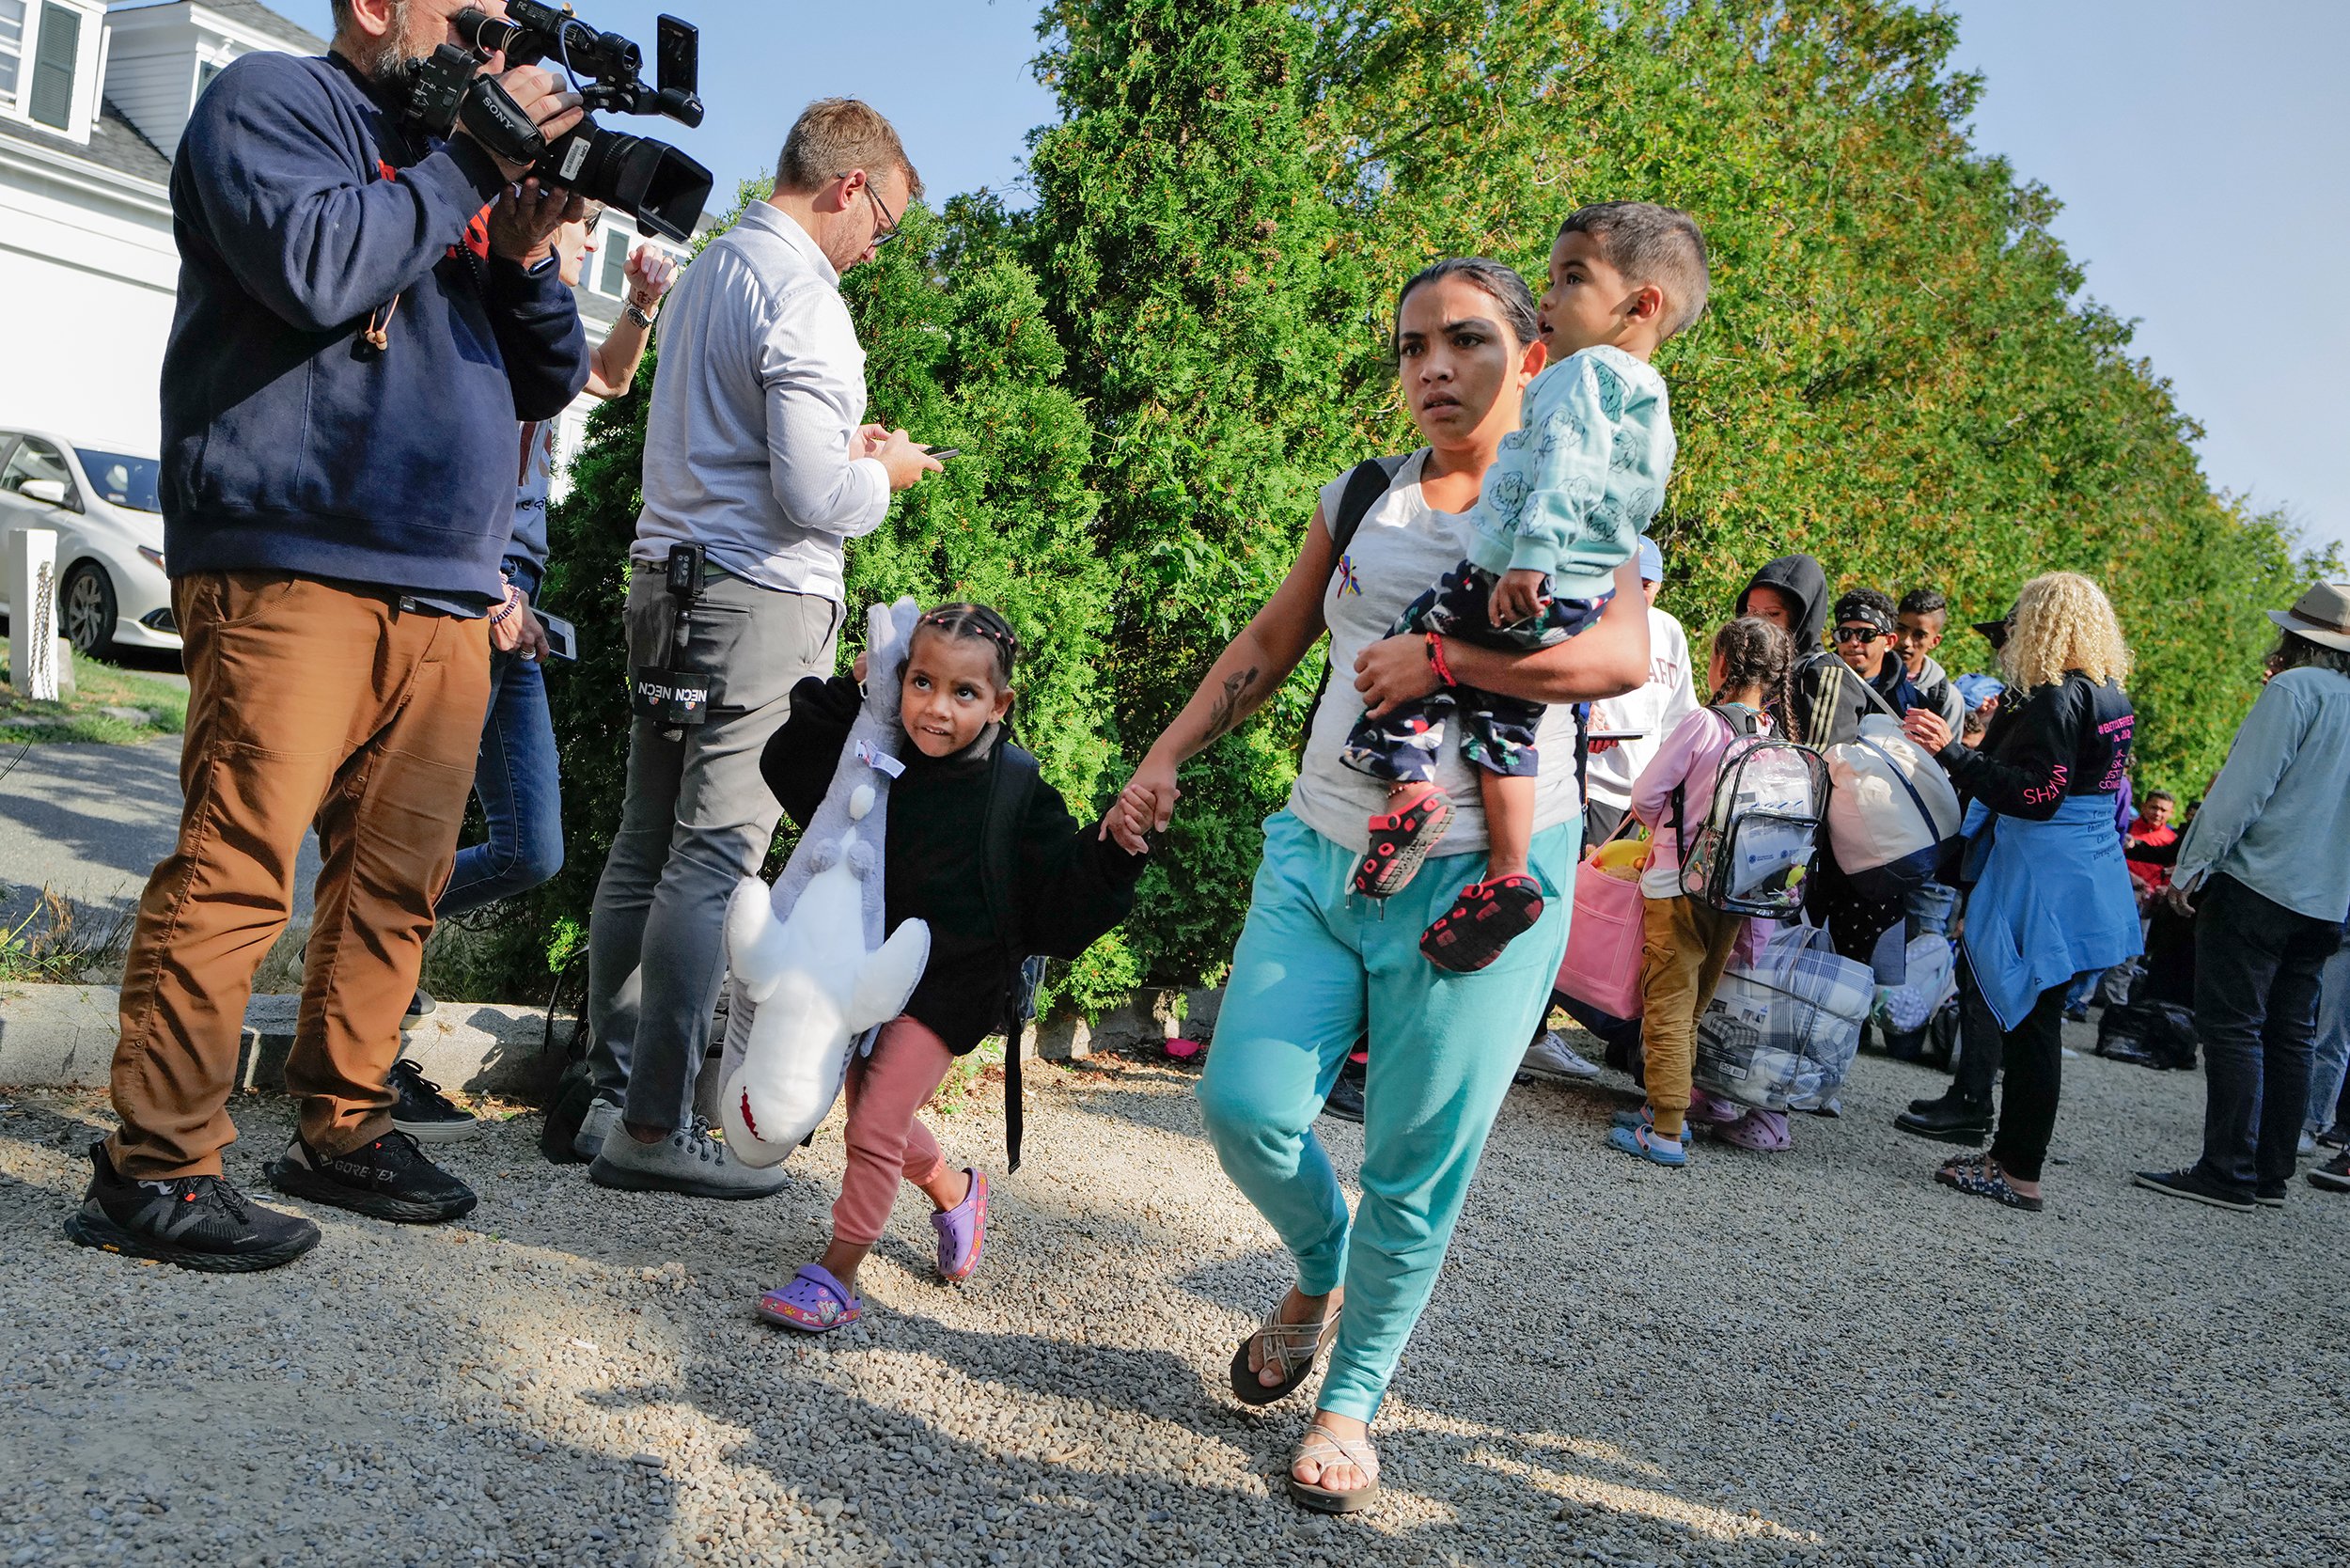  A Venezuelan migrant lead her children onto a bus to the Vineyard Haven ferry terminal outside of St. Andrew's Parish House in Martha’s Vineyard in September 2022. About 50 migrants were sent to the island as part of Florida Gov. Ron DeSantis’ reloc